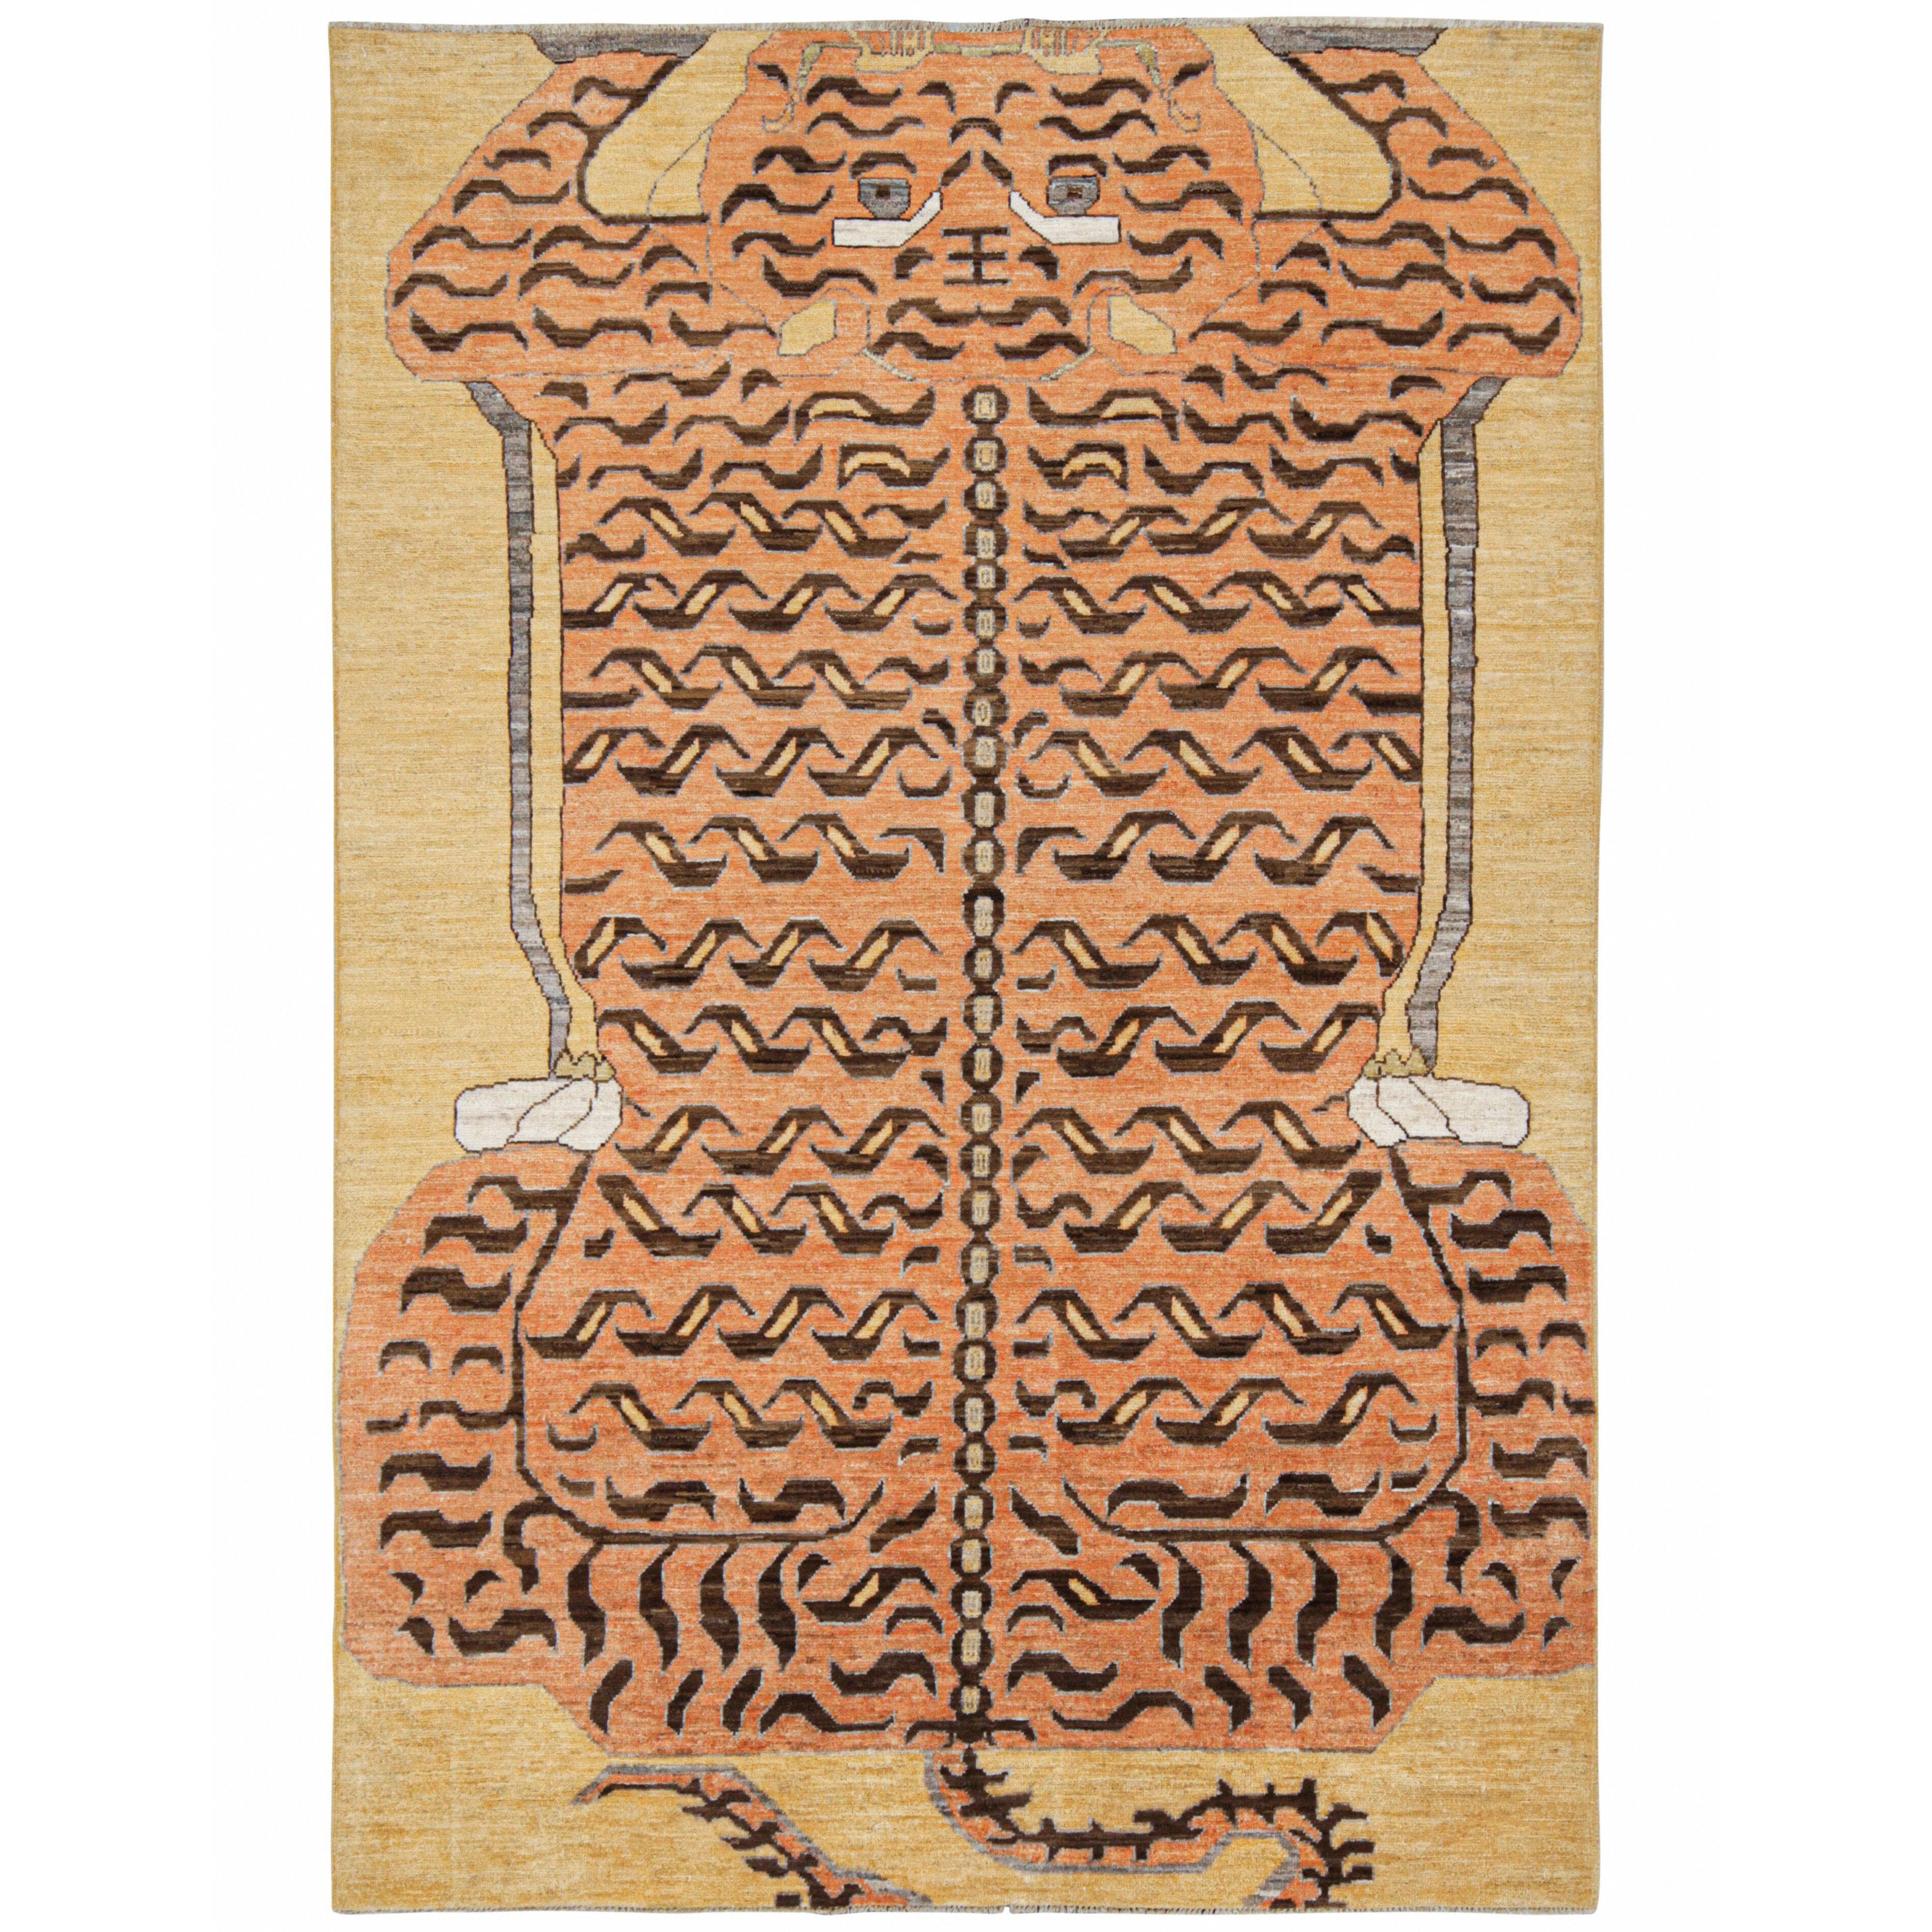 Rug & Kilim’s Classic Style Tiger-Skin Rug with Orange and Brown Pictorial